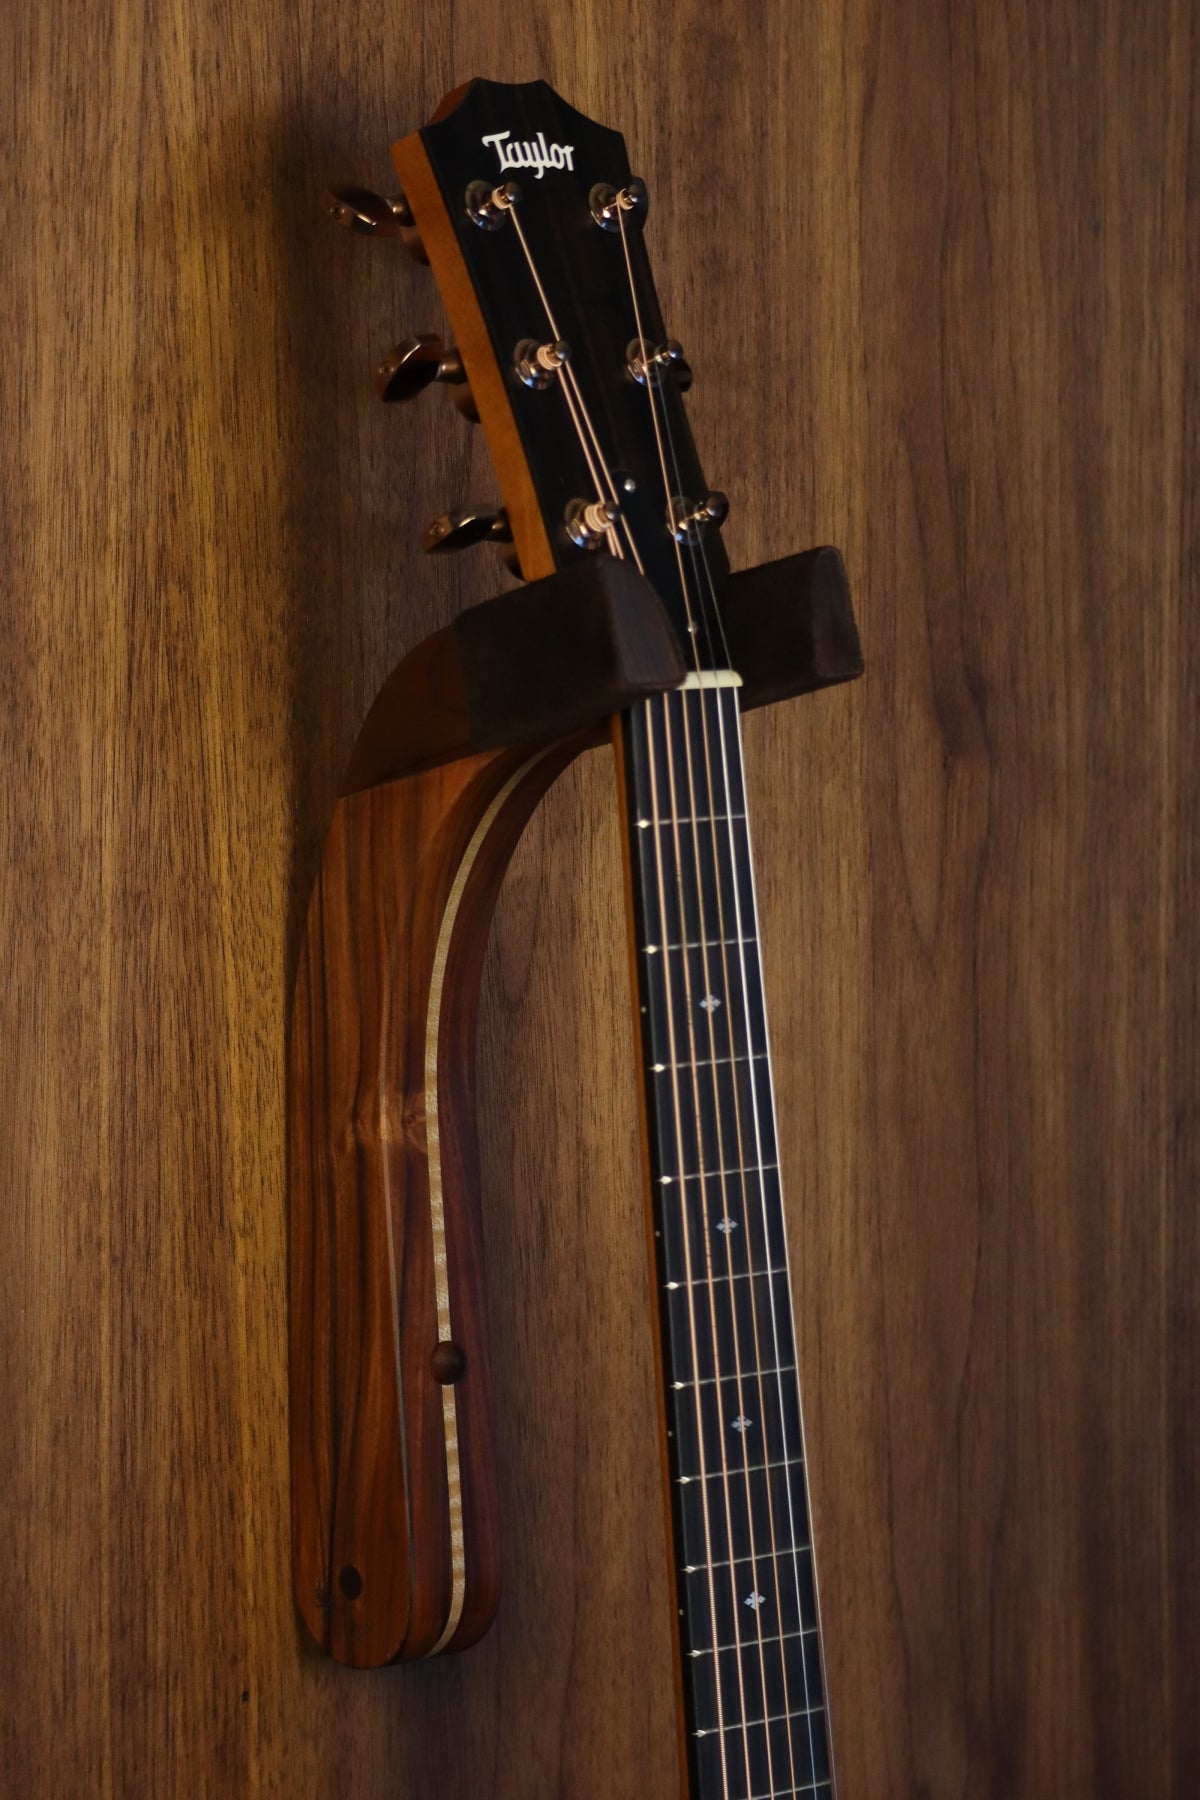 Morado Bolivian rosewood pau fero and curly maple wood guitar wall mount hanger installed on paneled wall with Taylor guitar